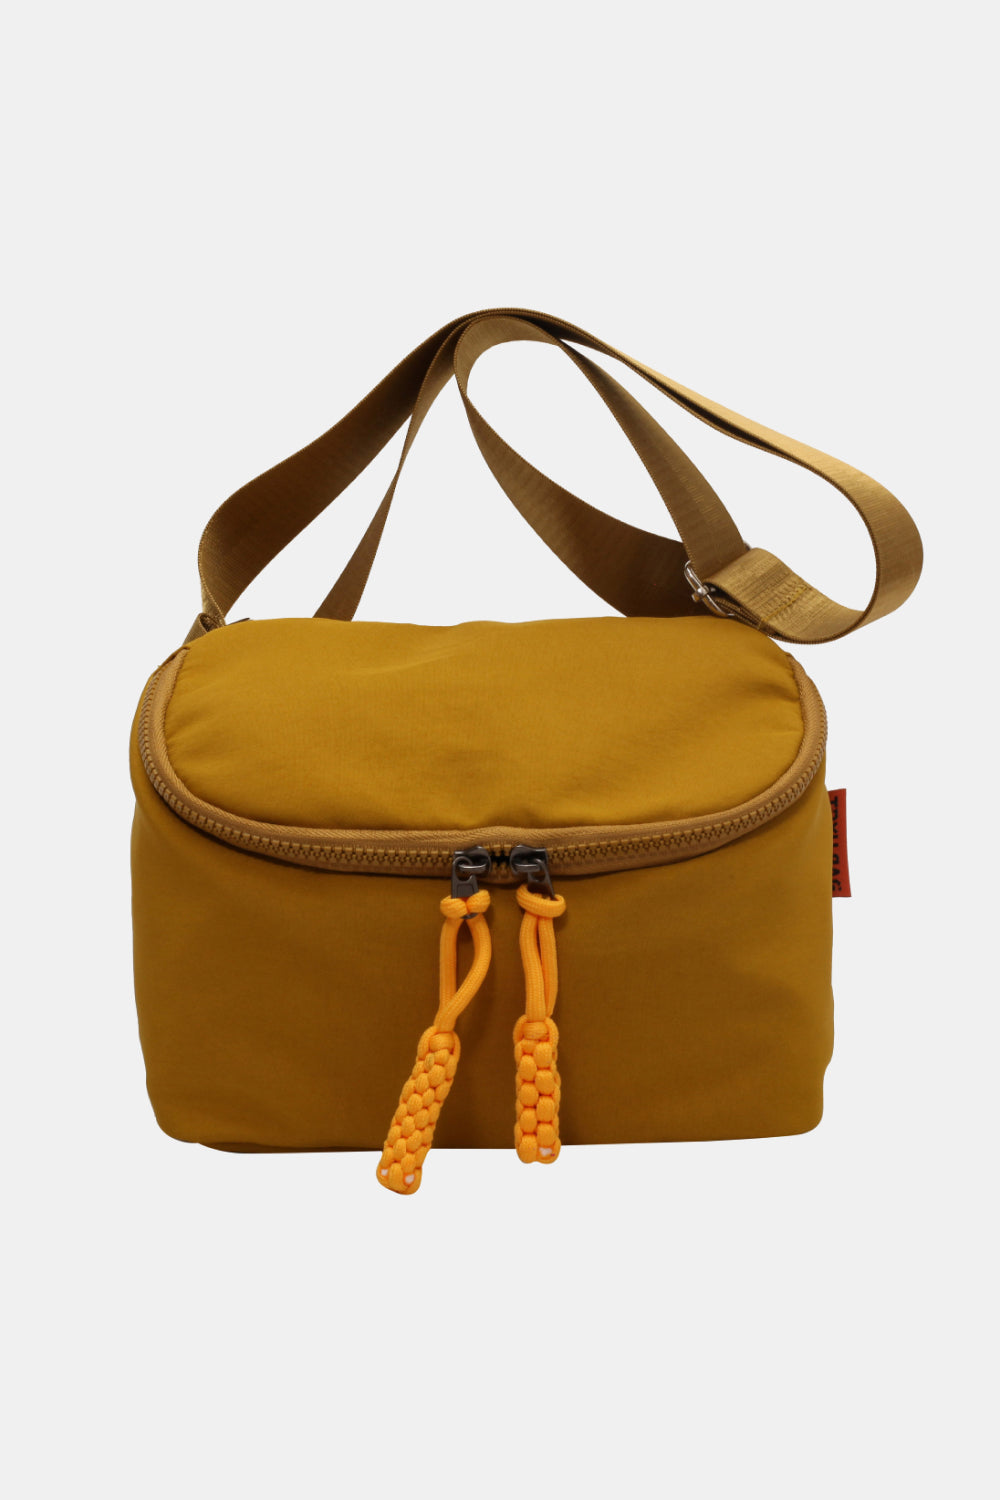 Medium Nylon Sling Bag Available in Several Colors